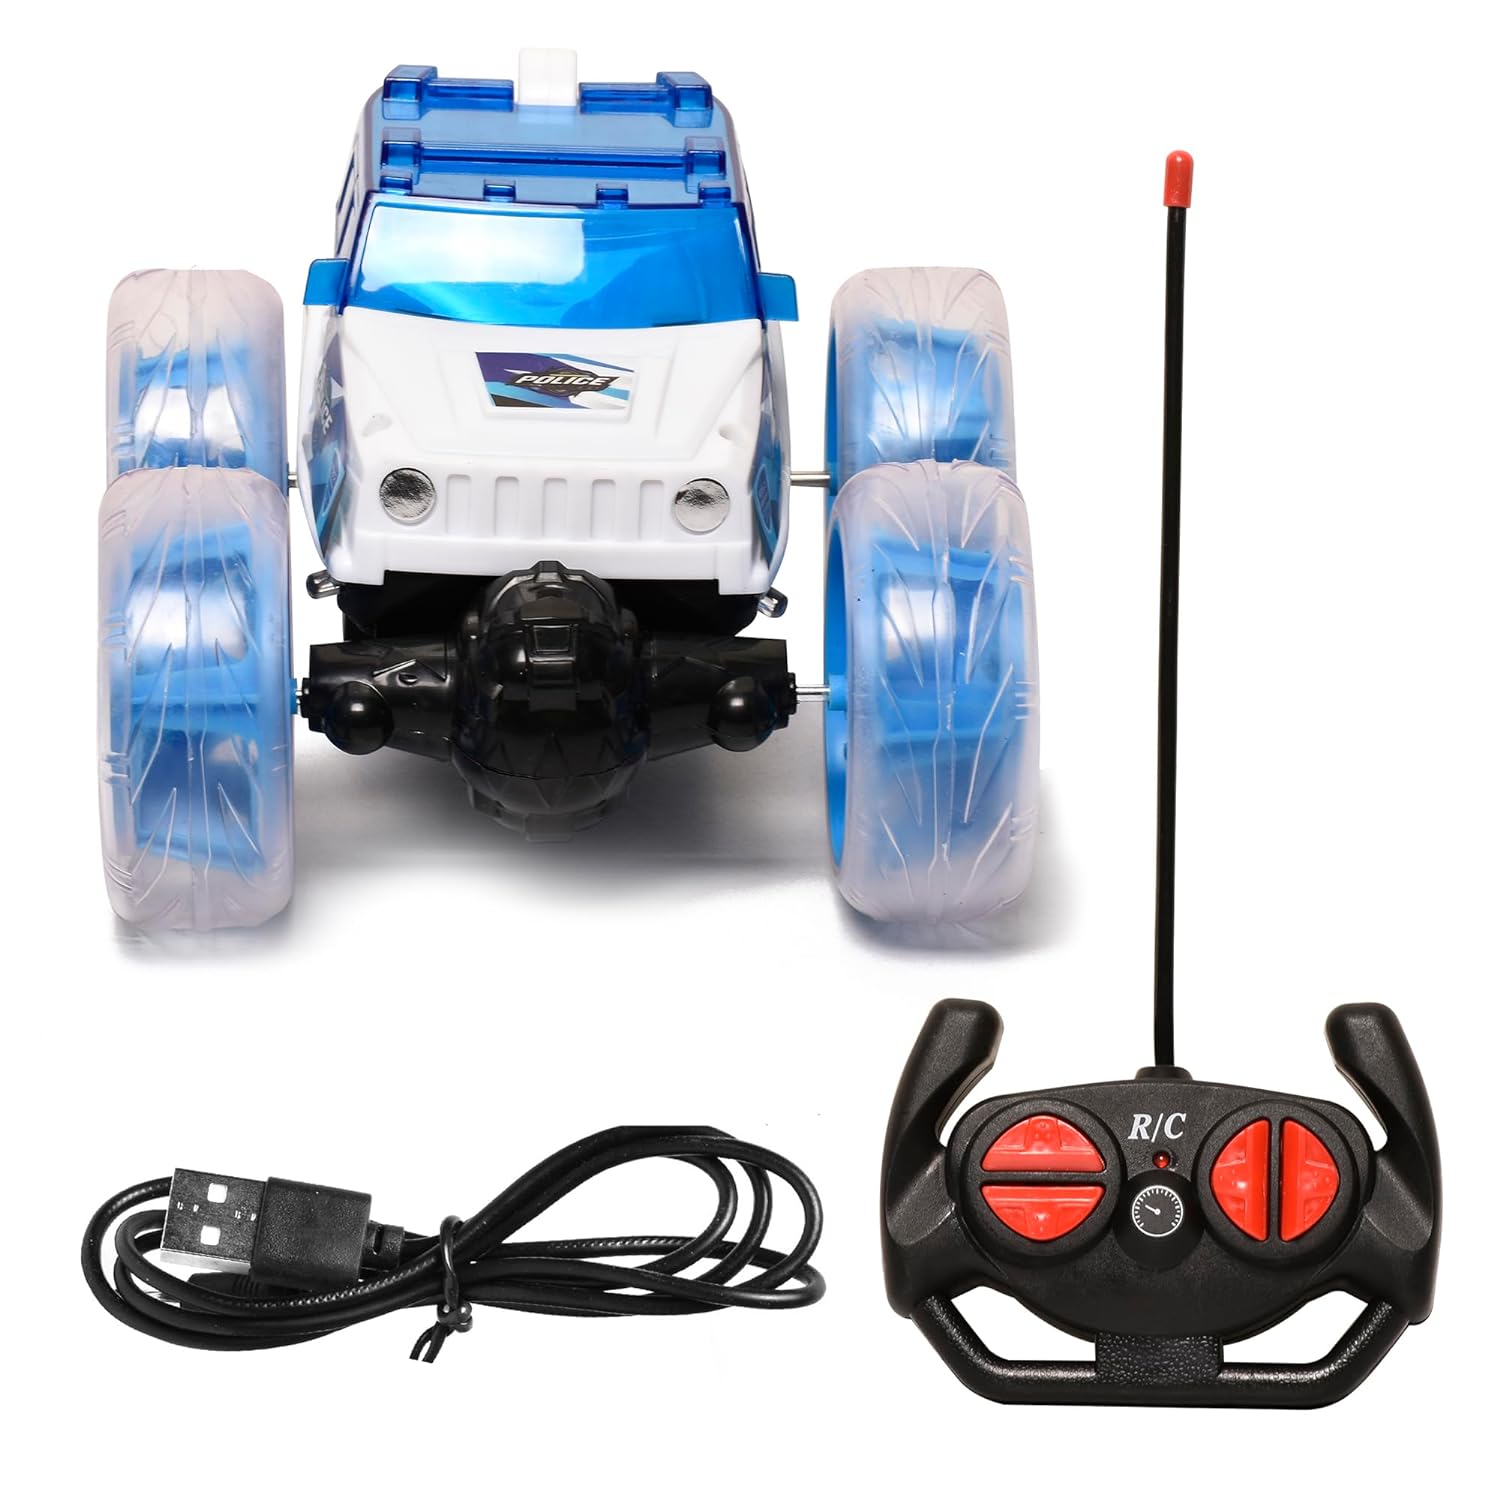 Braintastic 4x4 Off-Road Police Acrobat Rechargeable RC Remote Control 360 Degree Stunt Function Twisting Car with 5D Colorful Lights & Music Toys for Kids 5+Years (Blue)